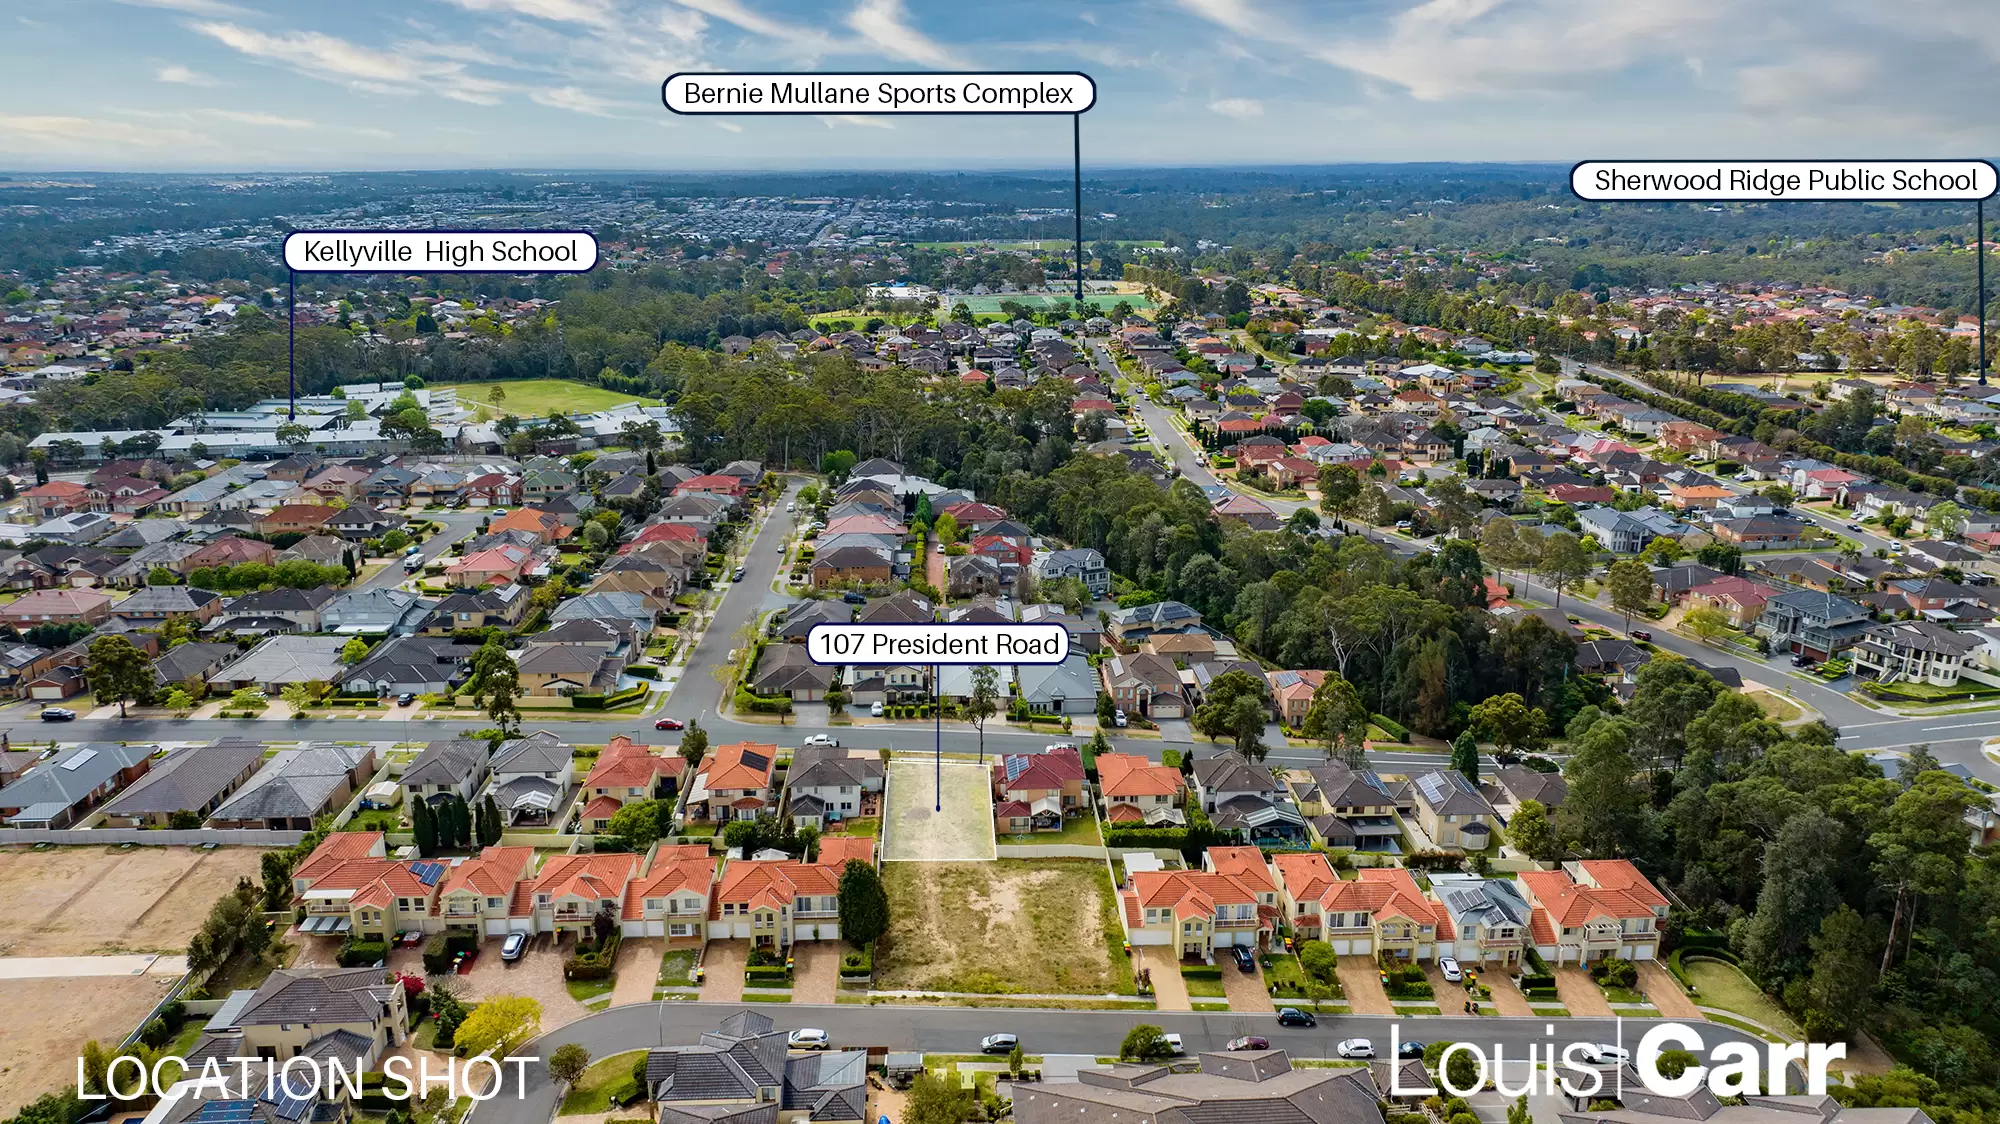 Photo #4: 107 President Road, Kellyville - Sold by Louis Carr Real Estate